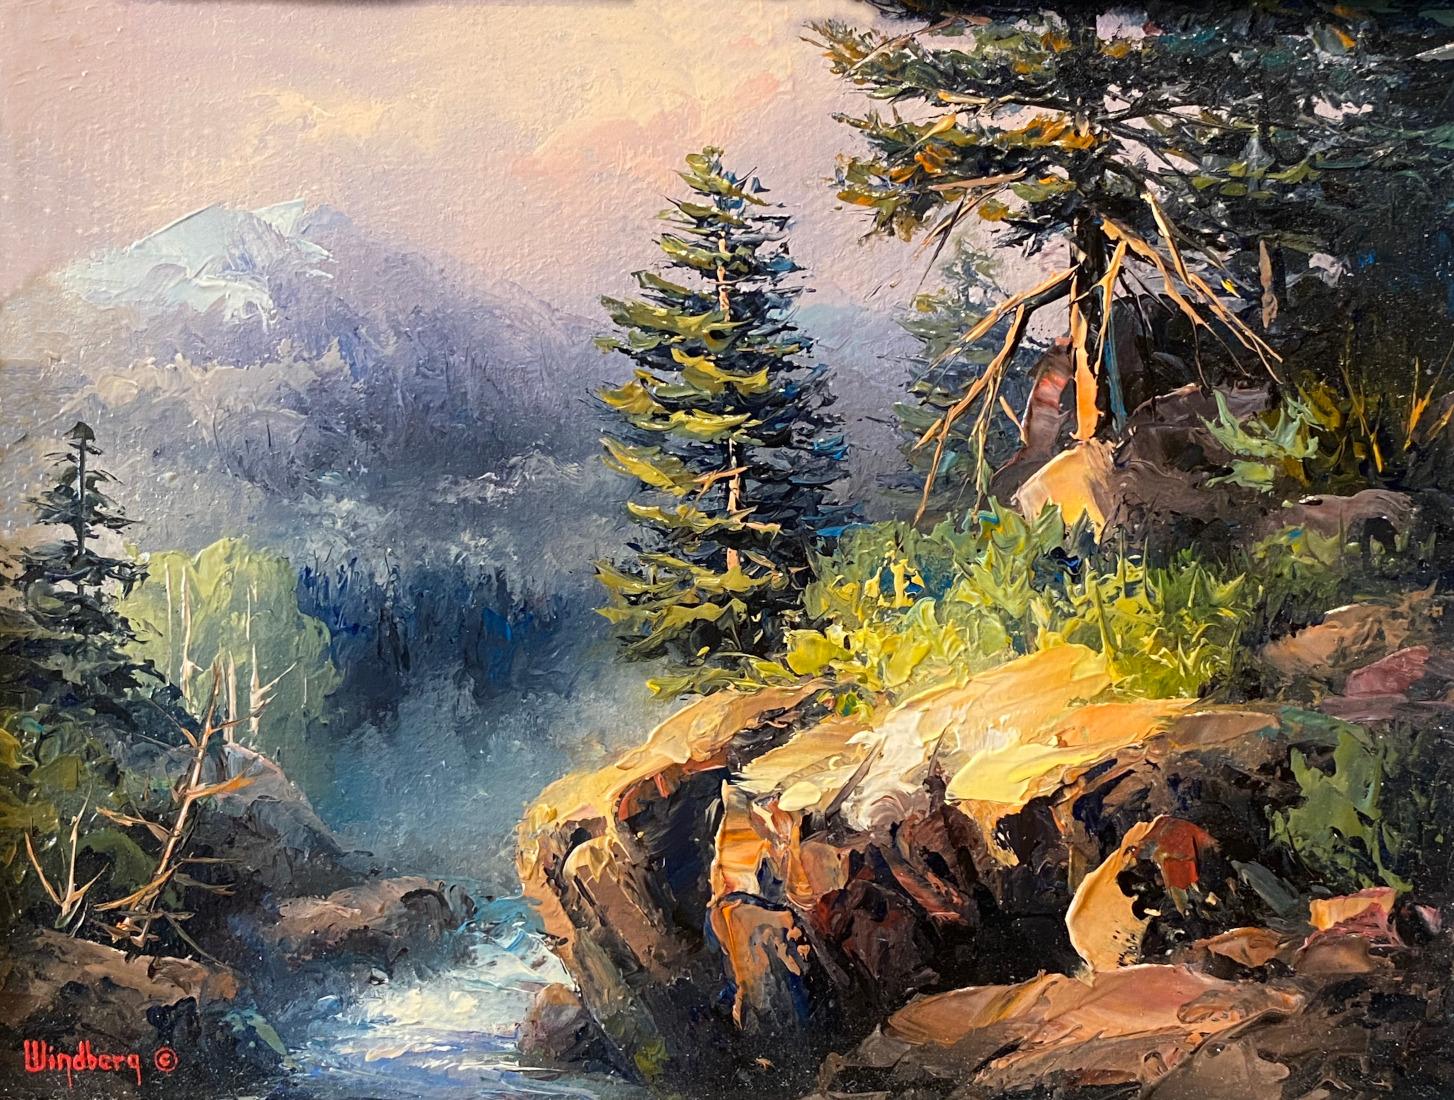 Dalhart Windberg Landscape Painting - "Mountain Stream"  Awesome small painting by one of the best.  Rockies?